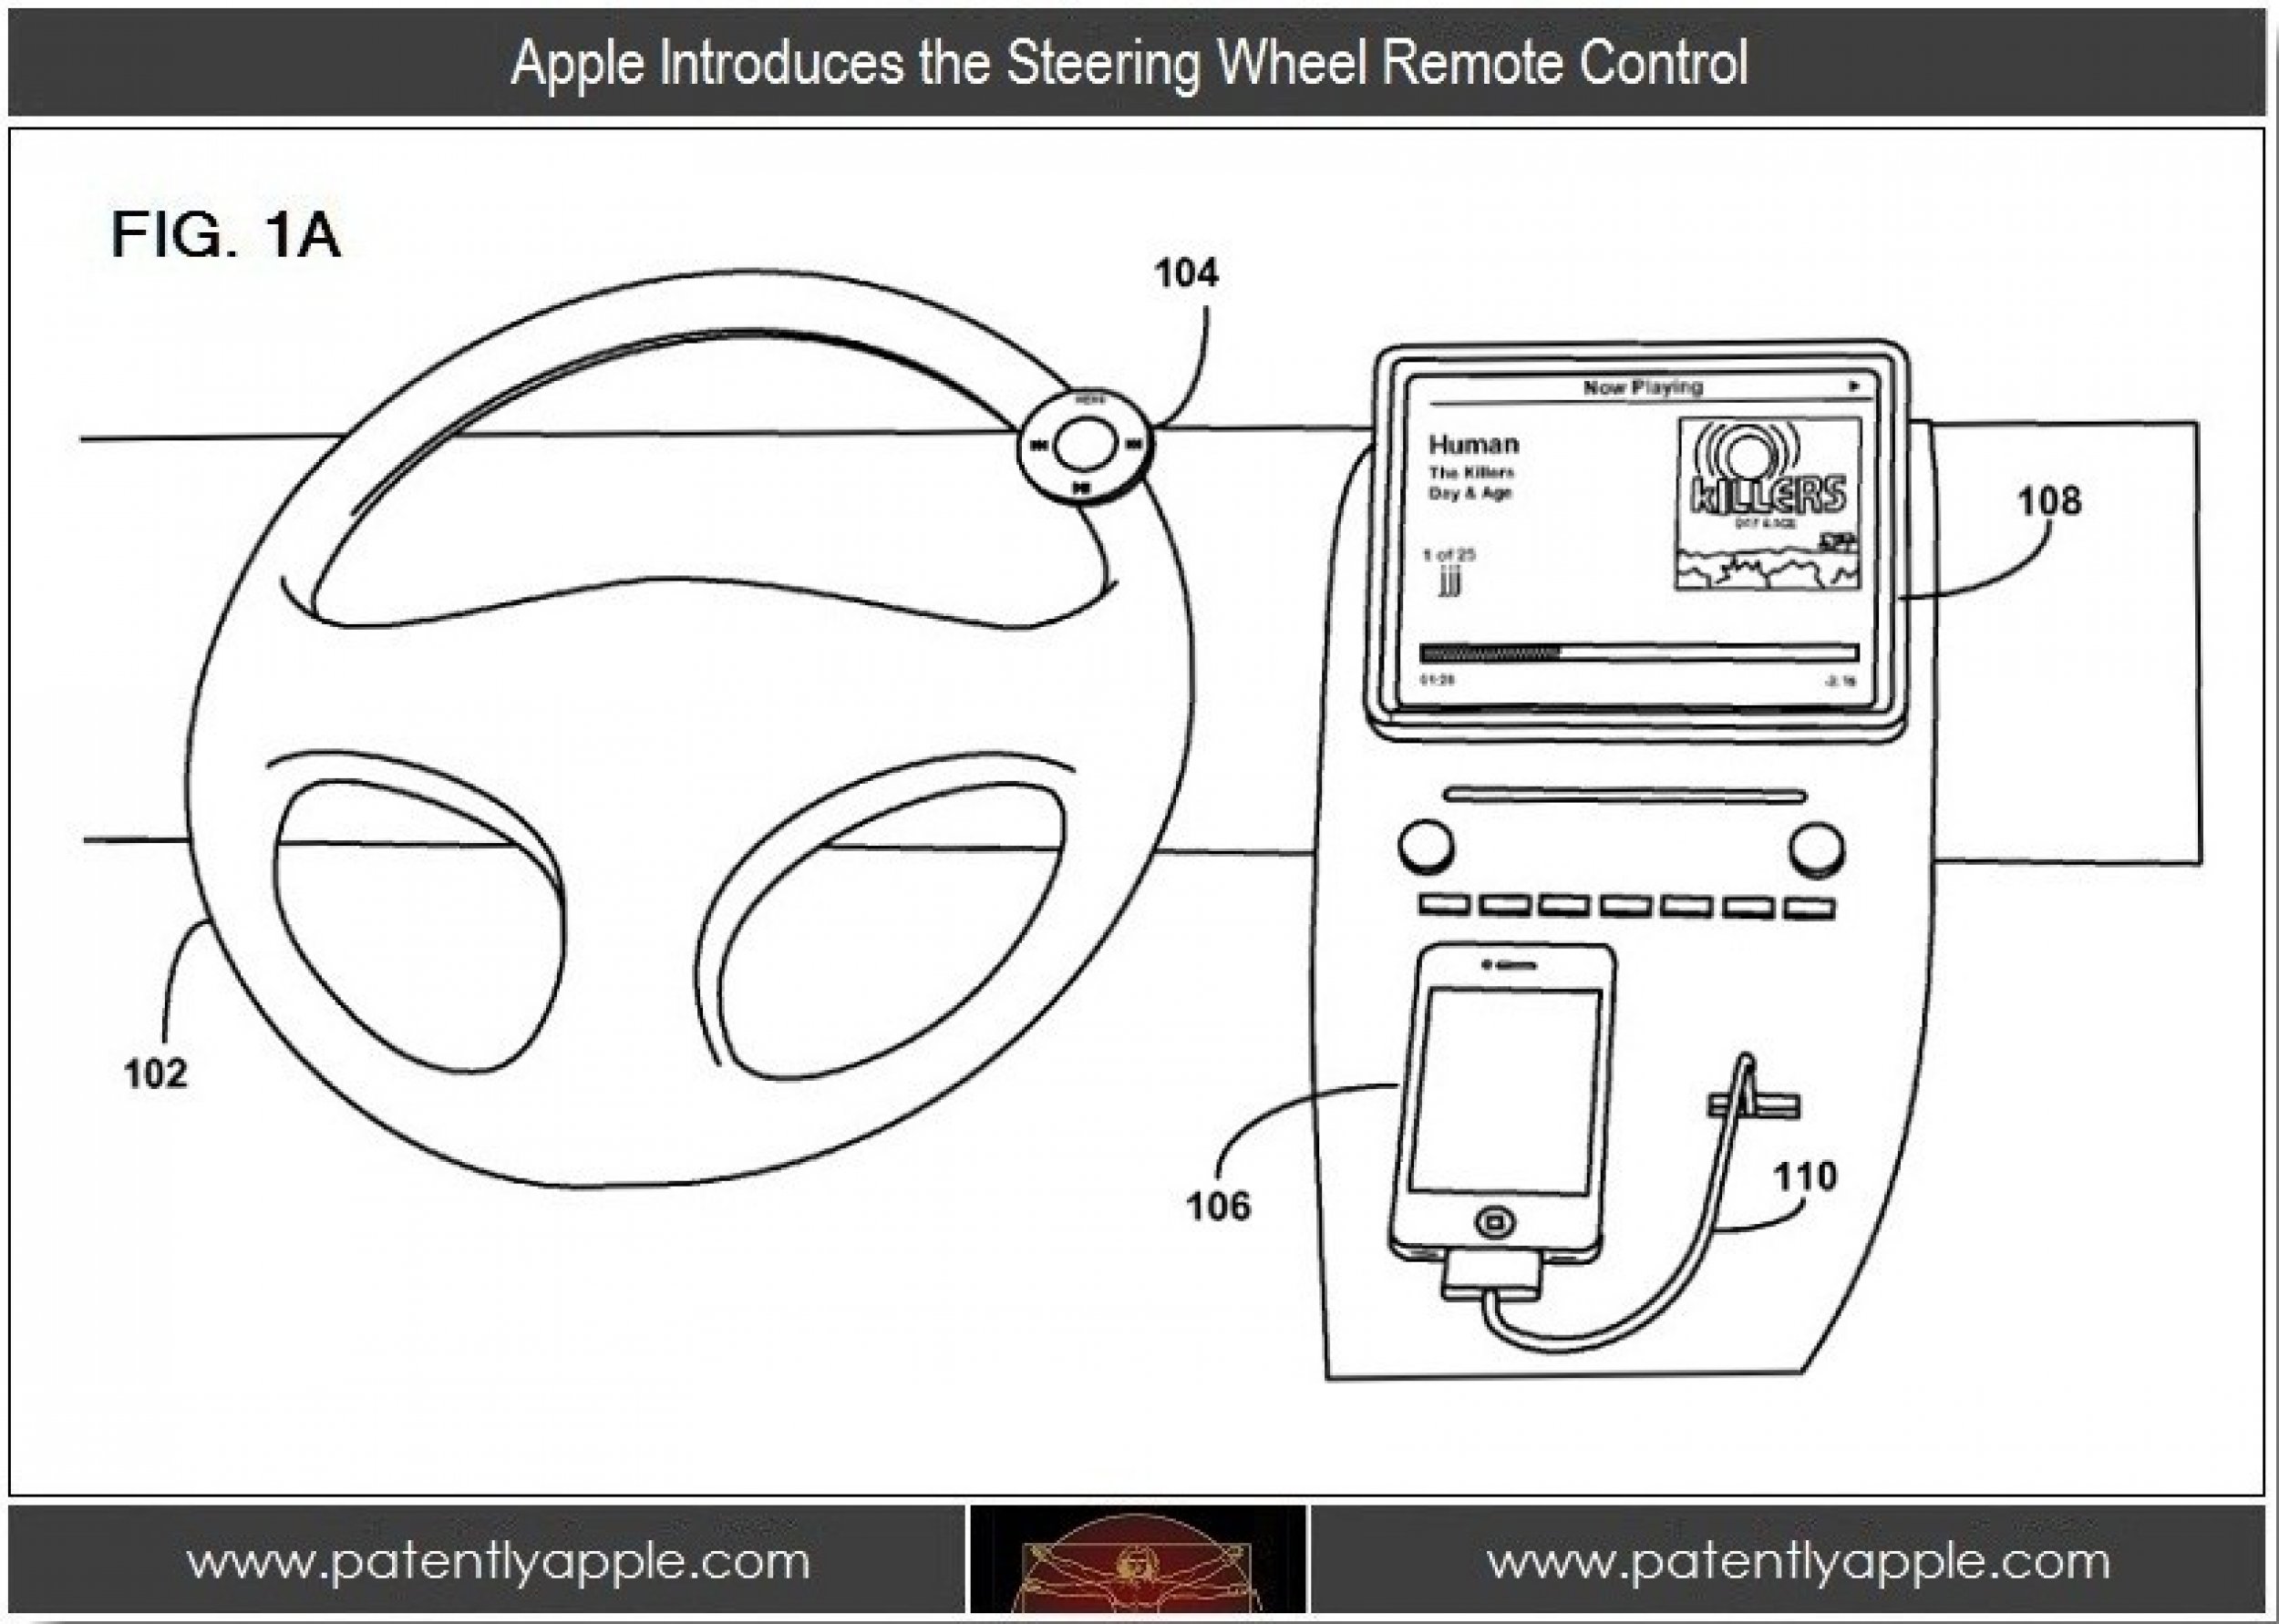 Apple Patents Steering Wheel Remote Control For Safer Hands-Free Driving